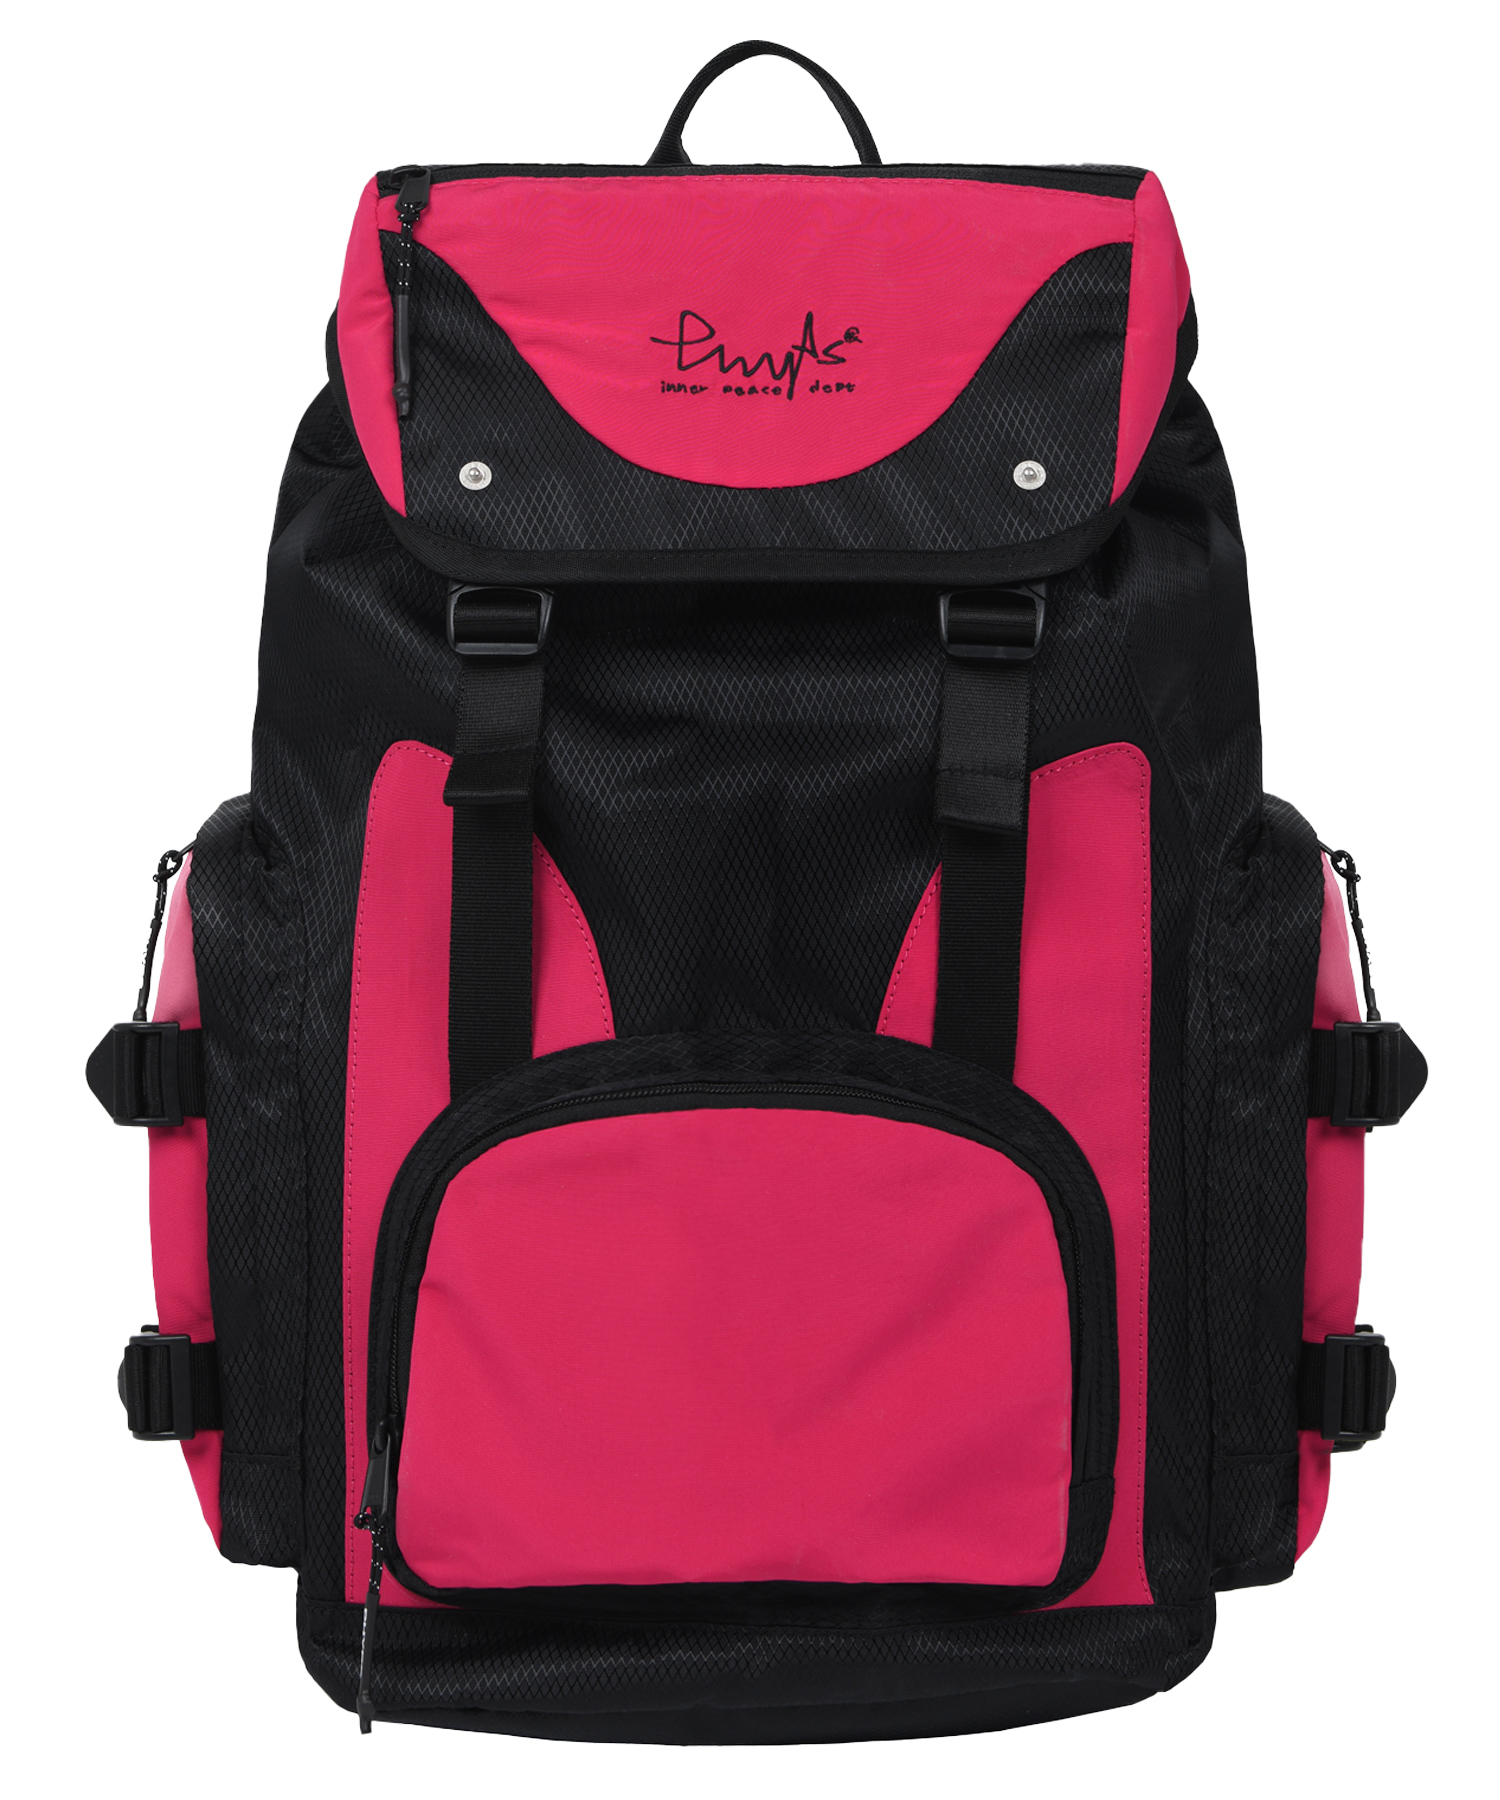 GO HIKED MOUTAIN BACKPACK PINK